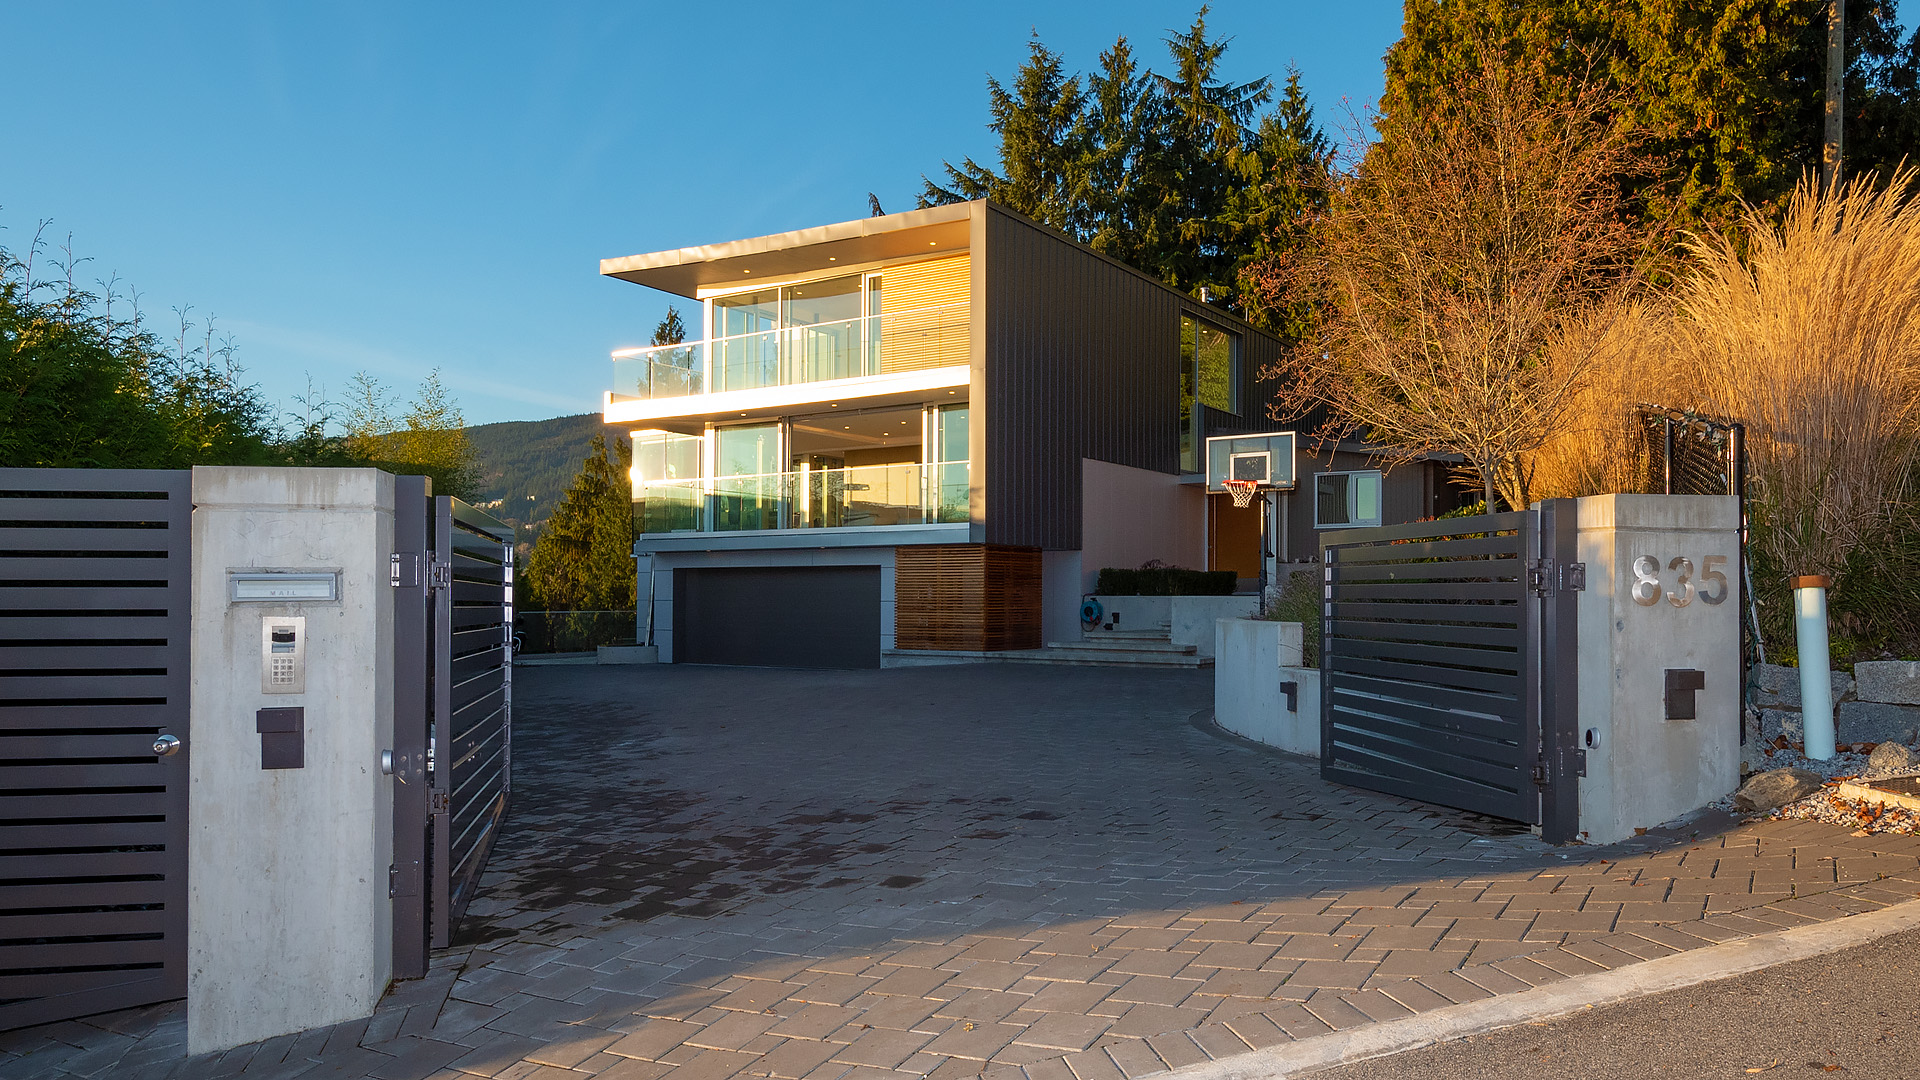 West Vancouver Waterfront Homes